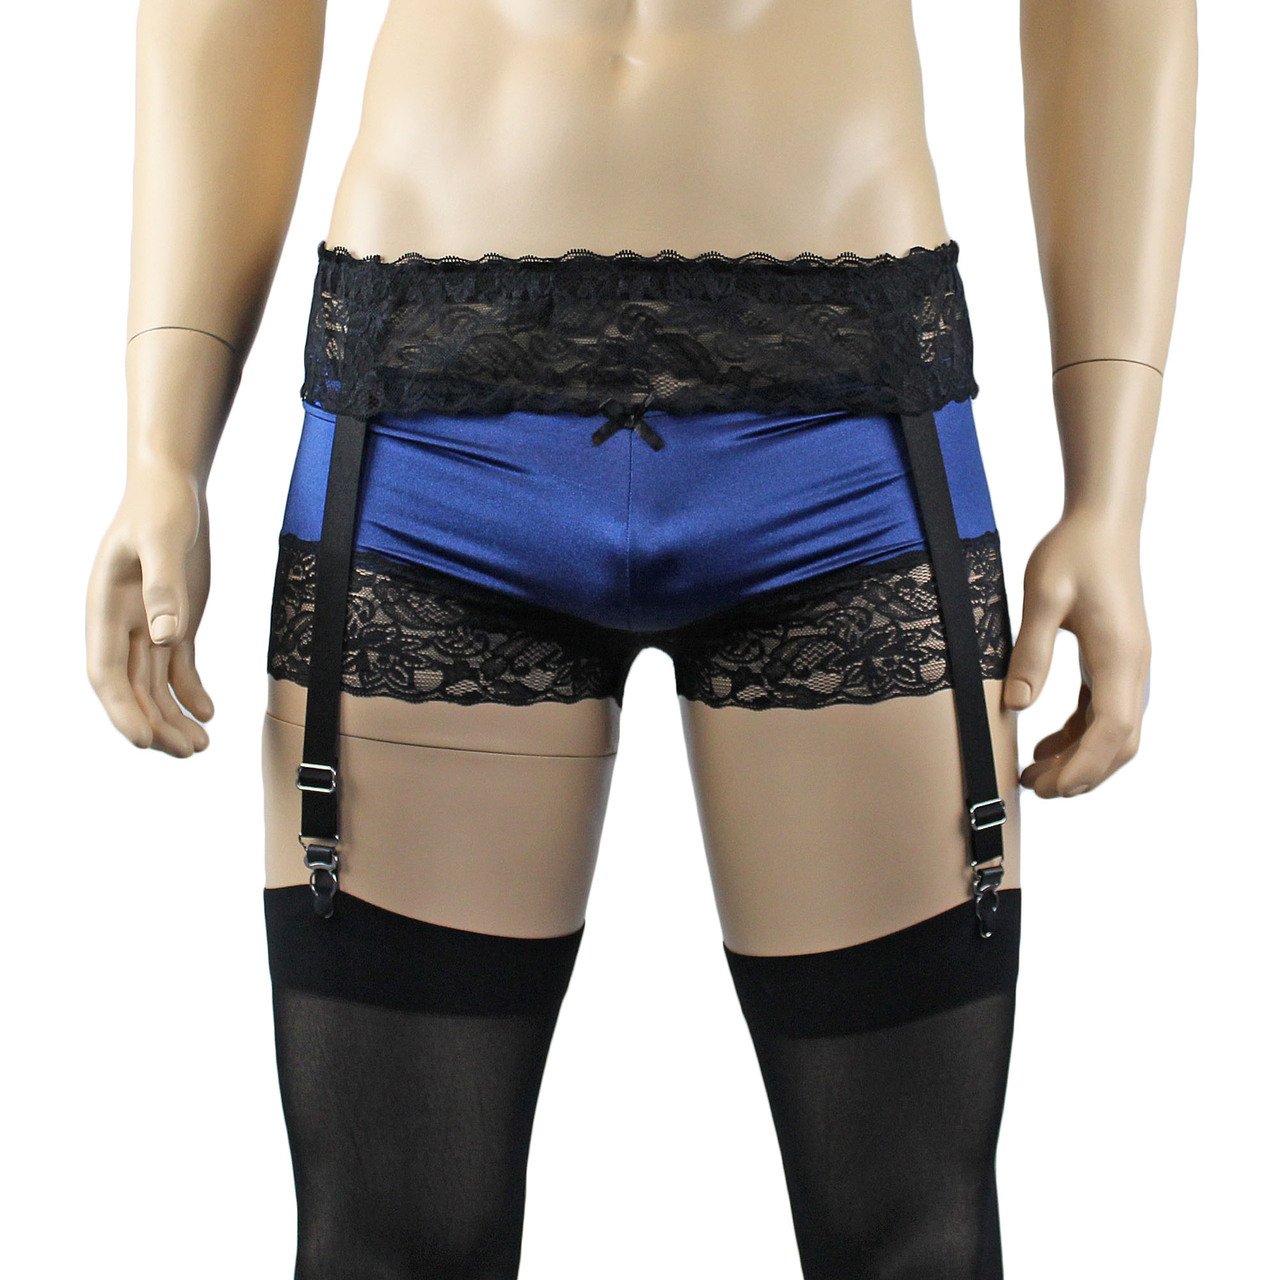 Mens Glamour Lycra & Lace Boxer Brief Shorts with Garterbelt & Stockings